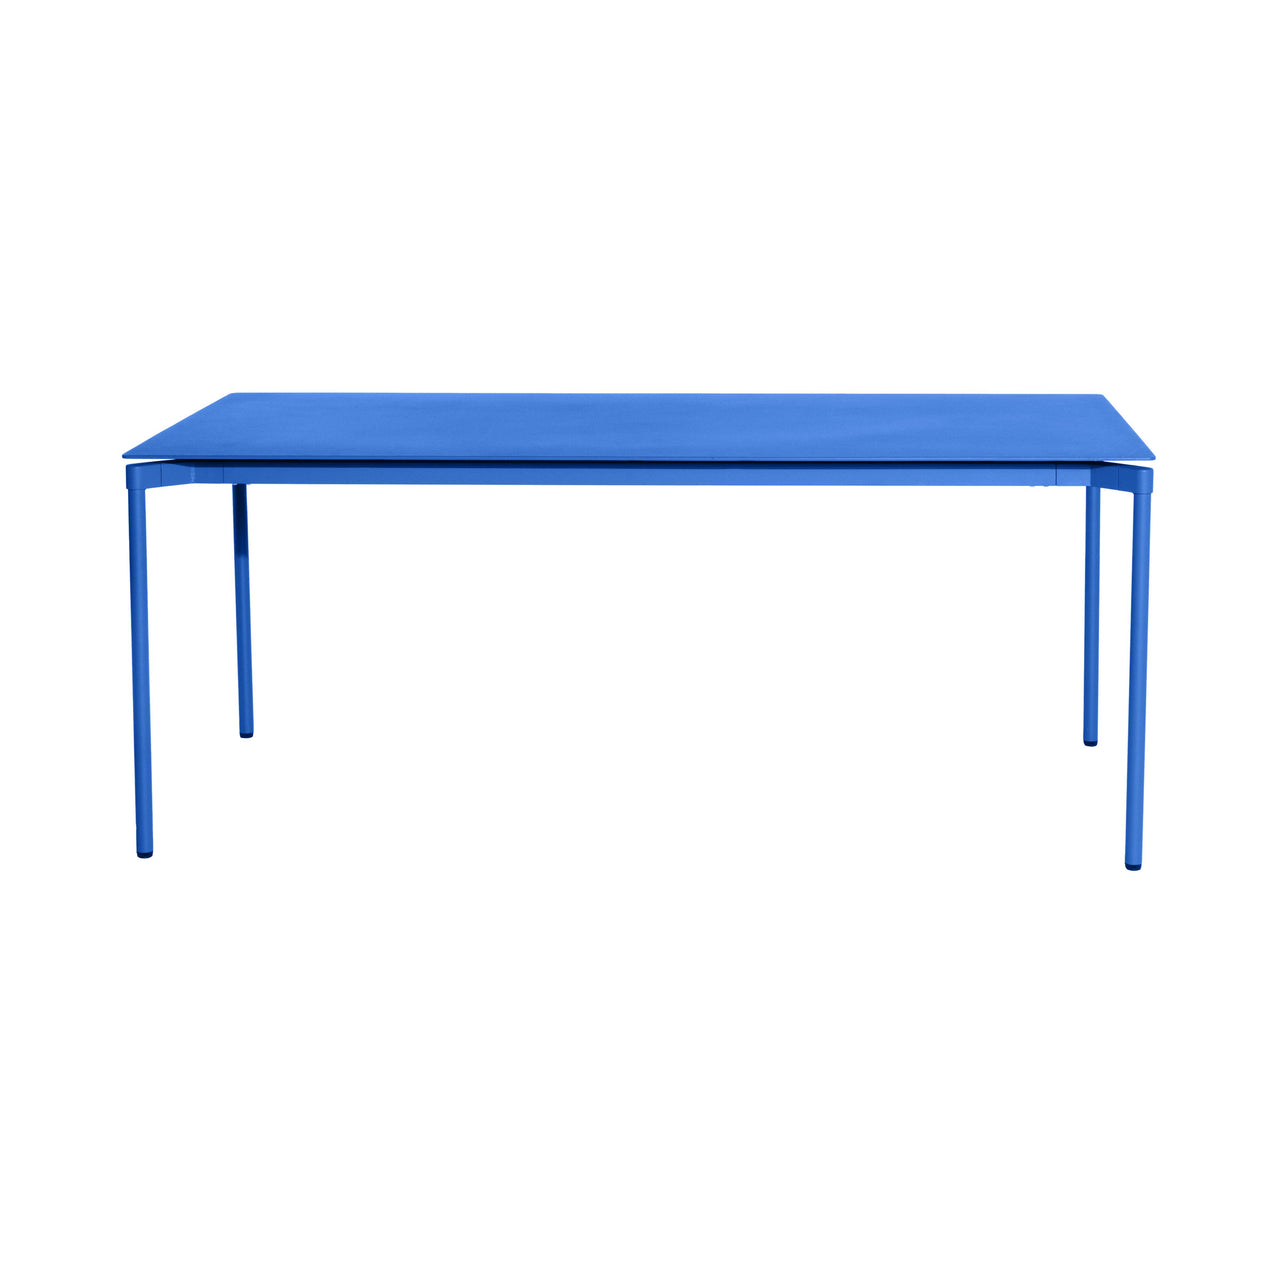 Fromme Dining Table: Outdoor + Rectangle + Blue